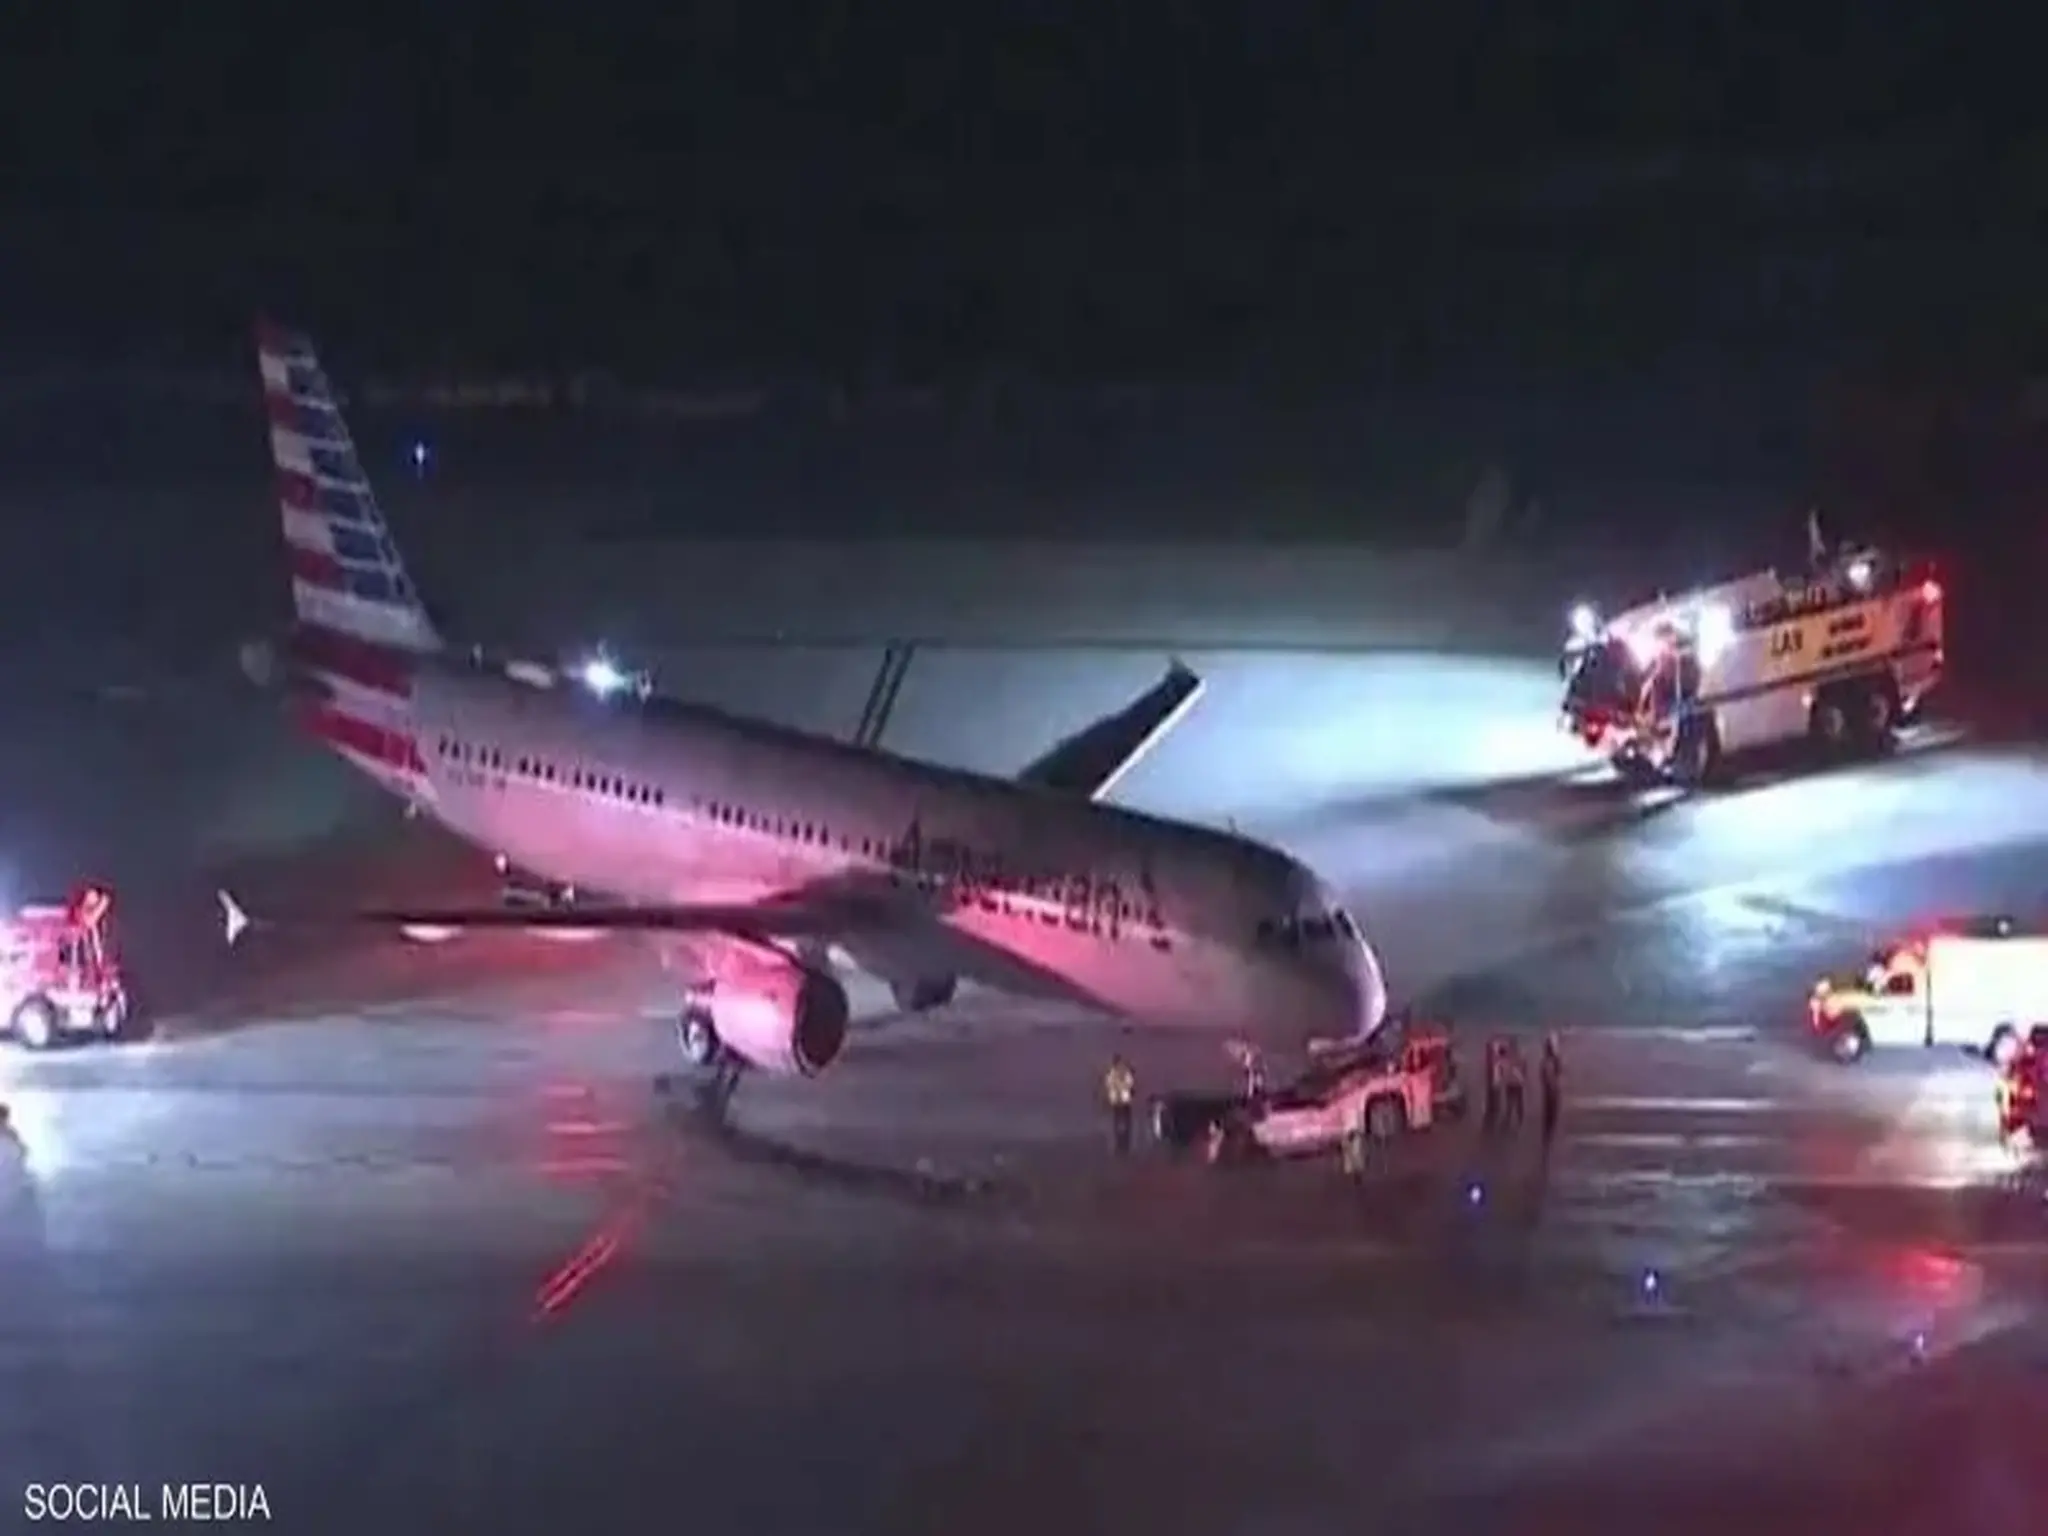 A plane crashes into a passenger bus at the airport